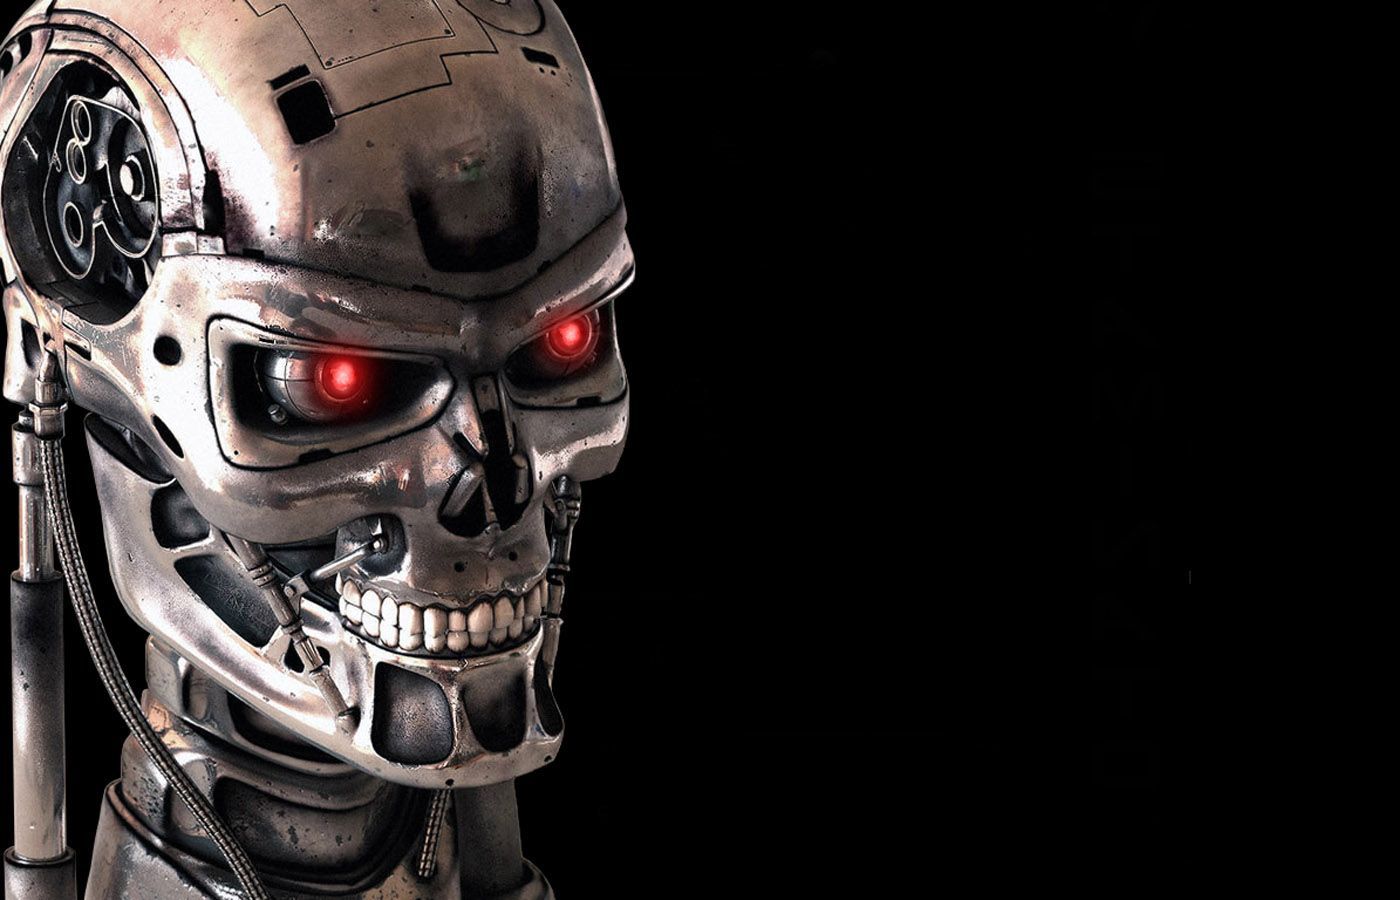 47 The Terminator HD Wallpapers Backgrounds - Wallpaper Abyss